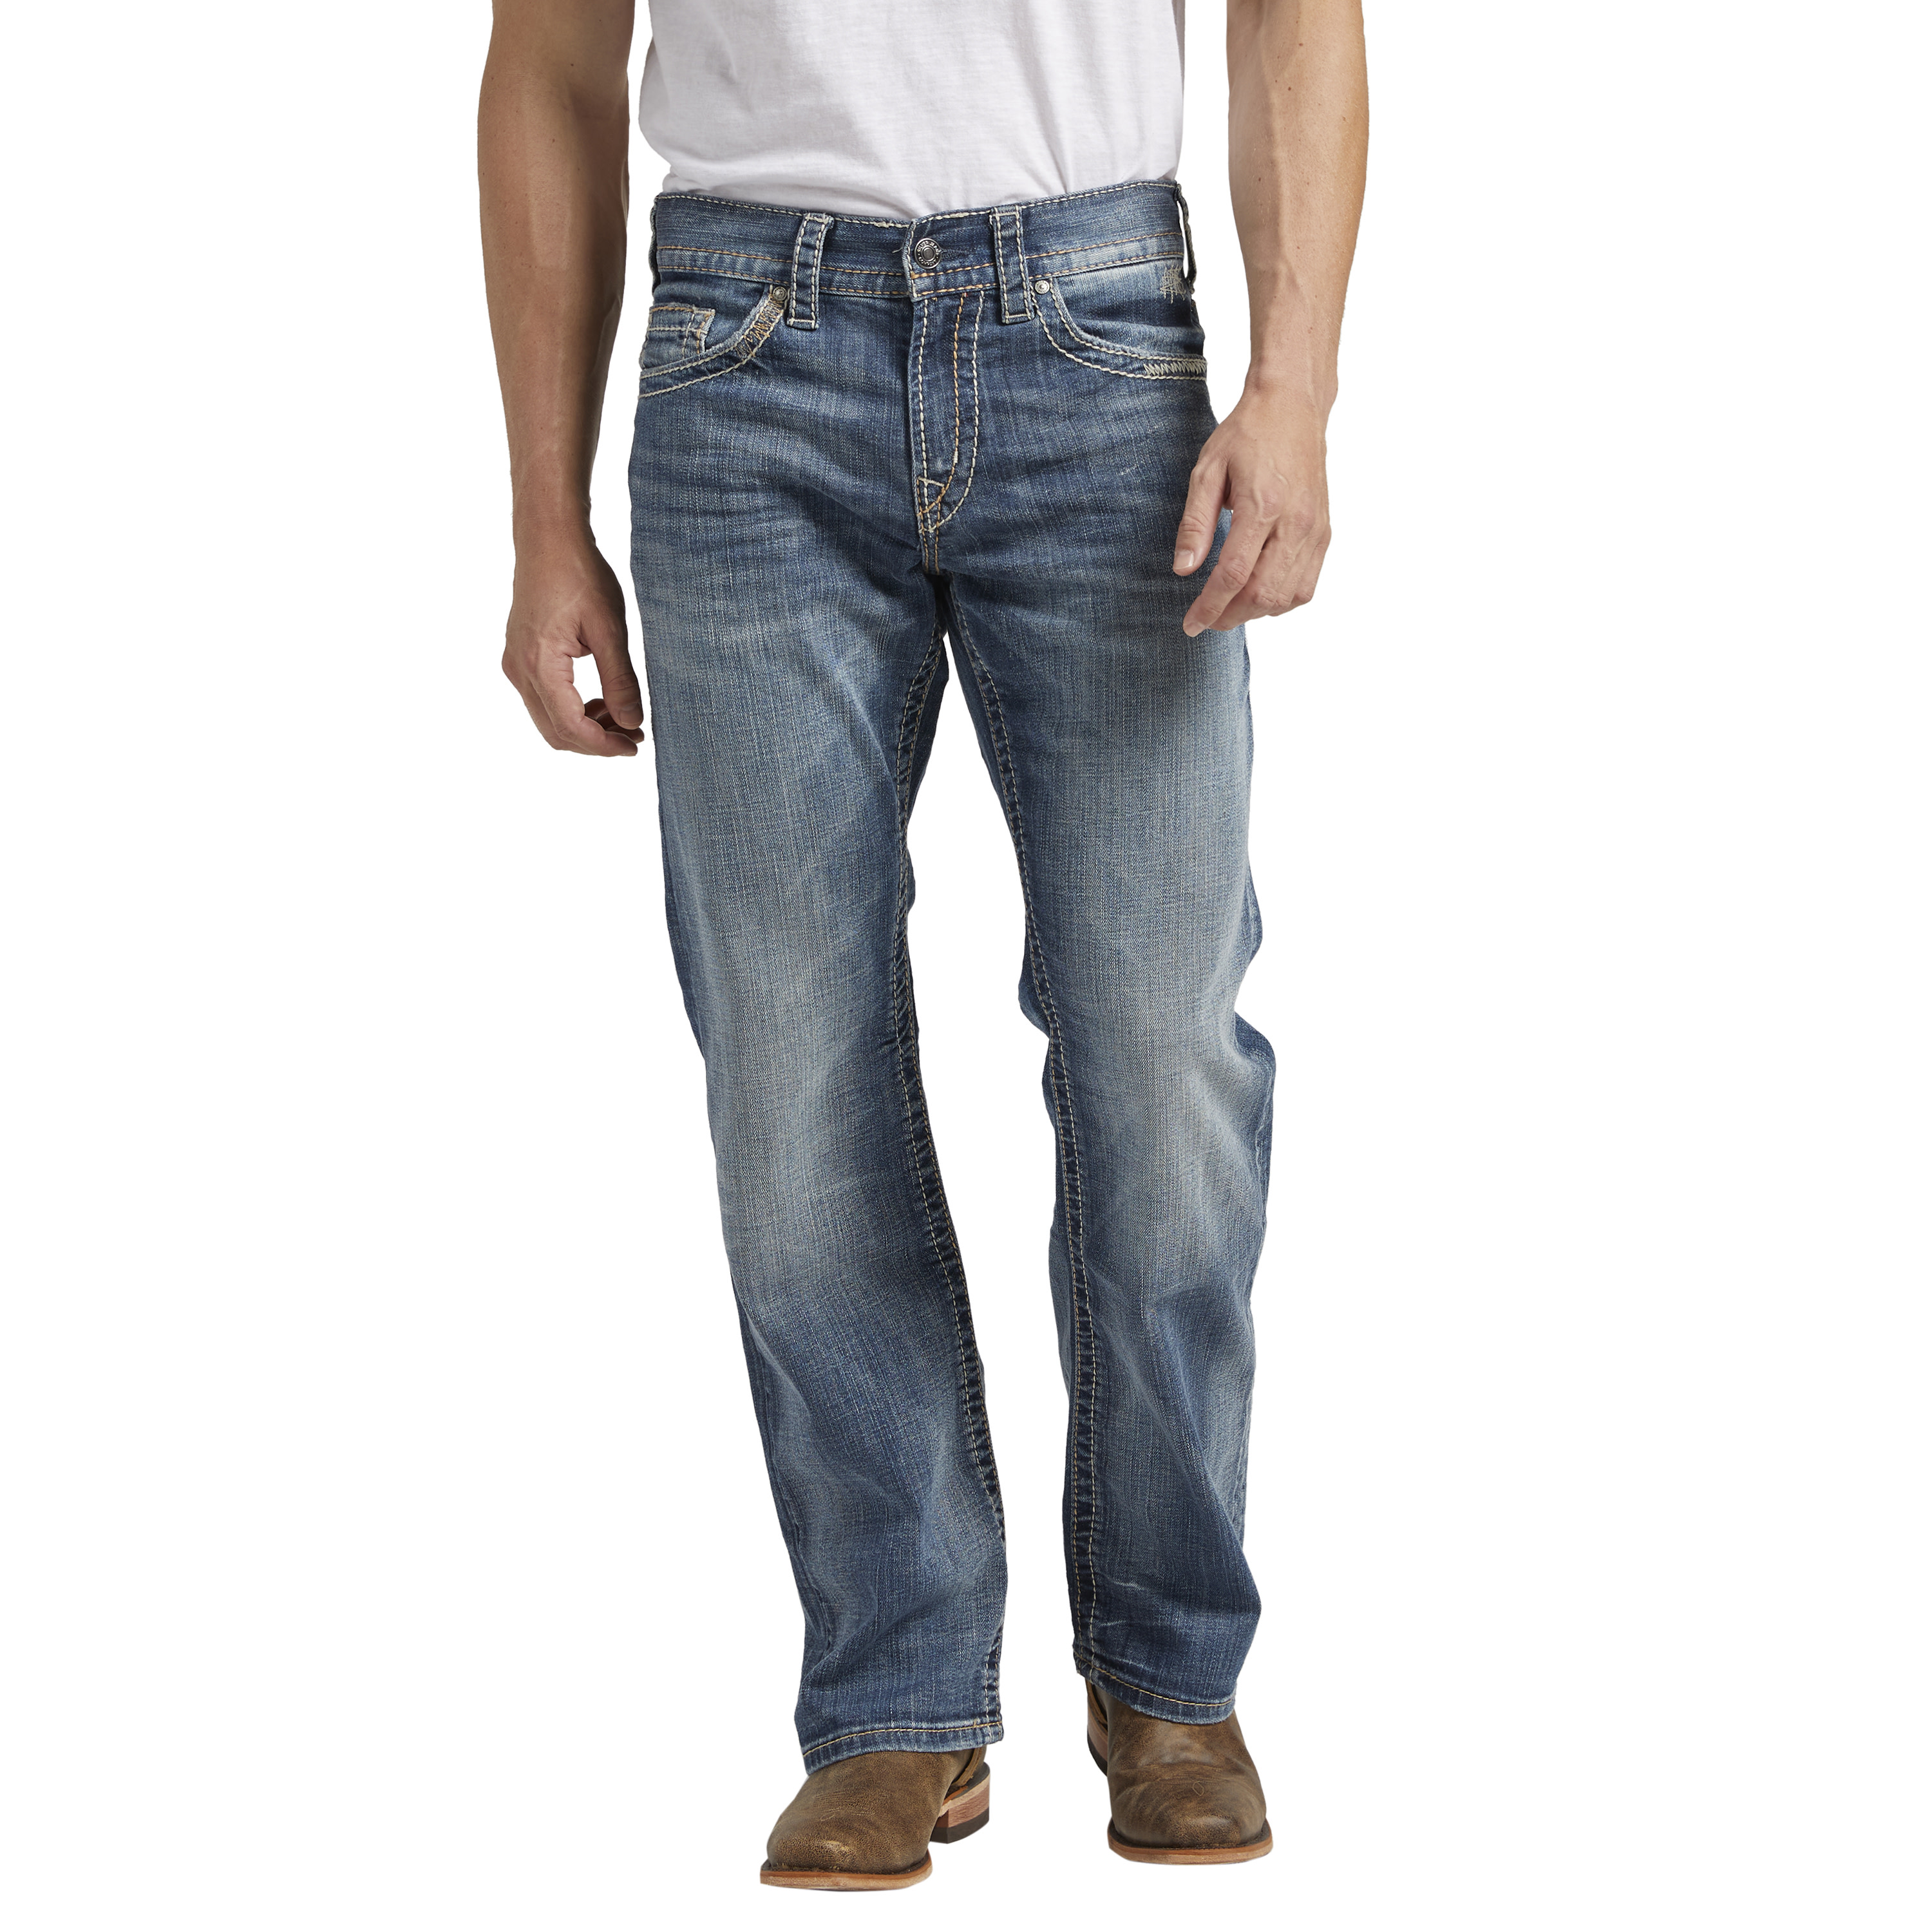 Silver Jeans Co. Men's Zac Relaxed Fit Straight Leg Jeans, Waist Sizes 30-42 - image 1 of 4